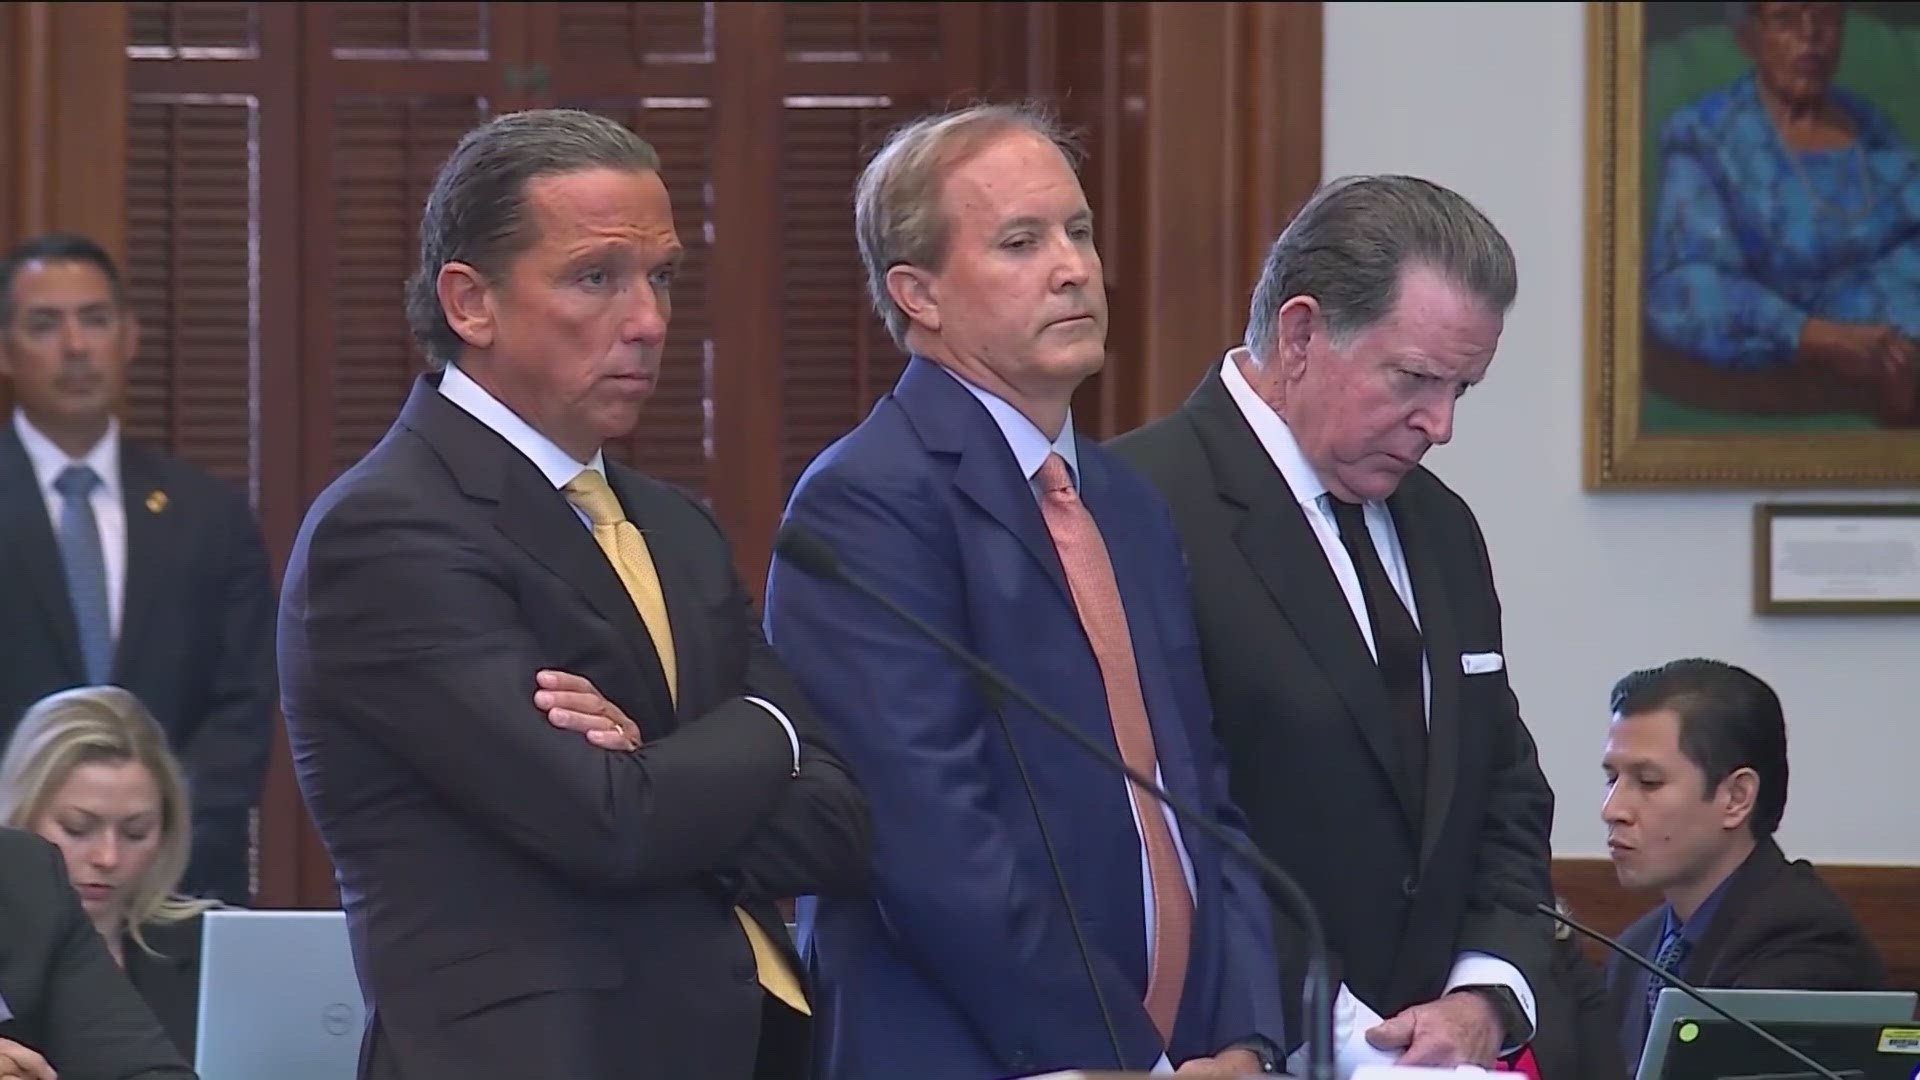 House investigators in the impeachment trial of Texas Attorney General Ken Paxton released previously undisclosed information that was not fully presented.